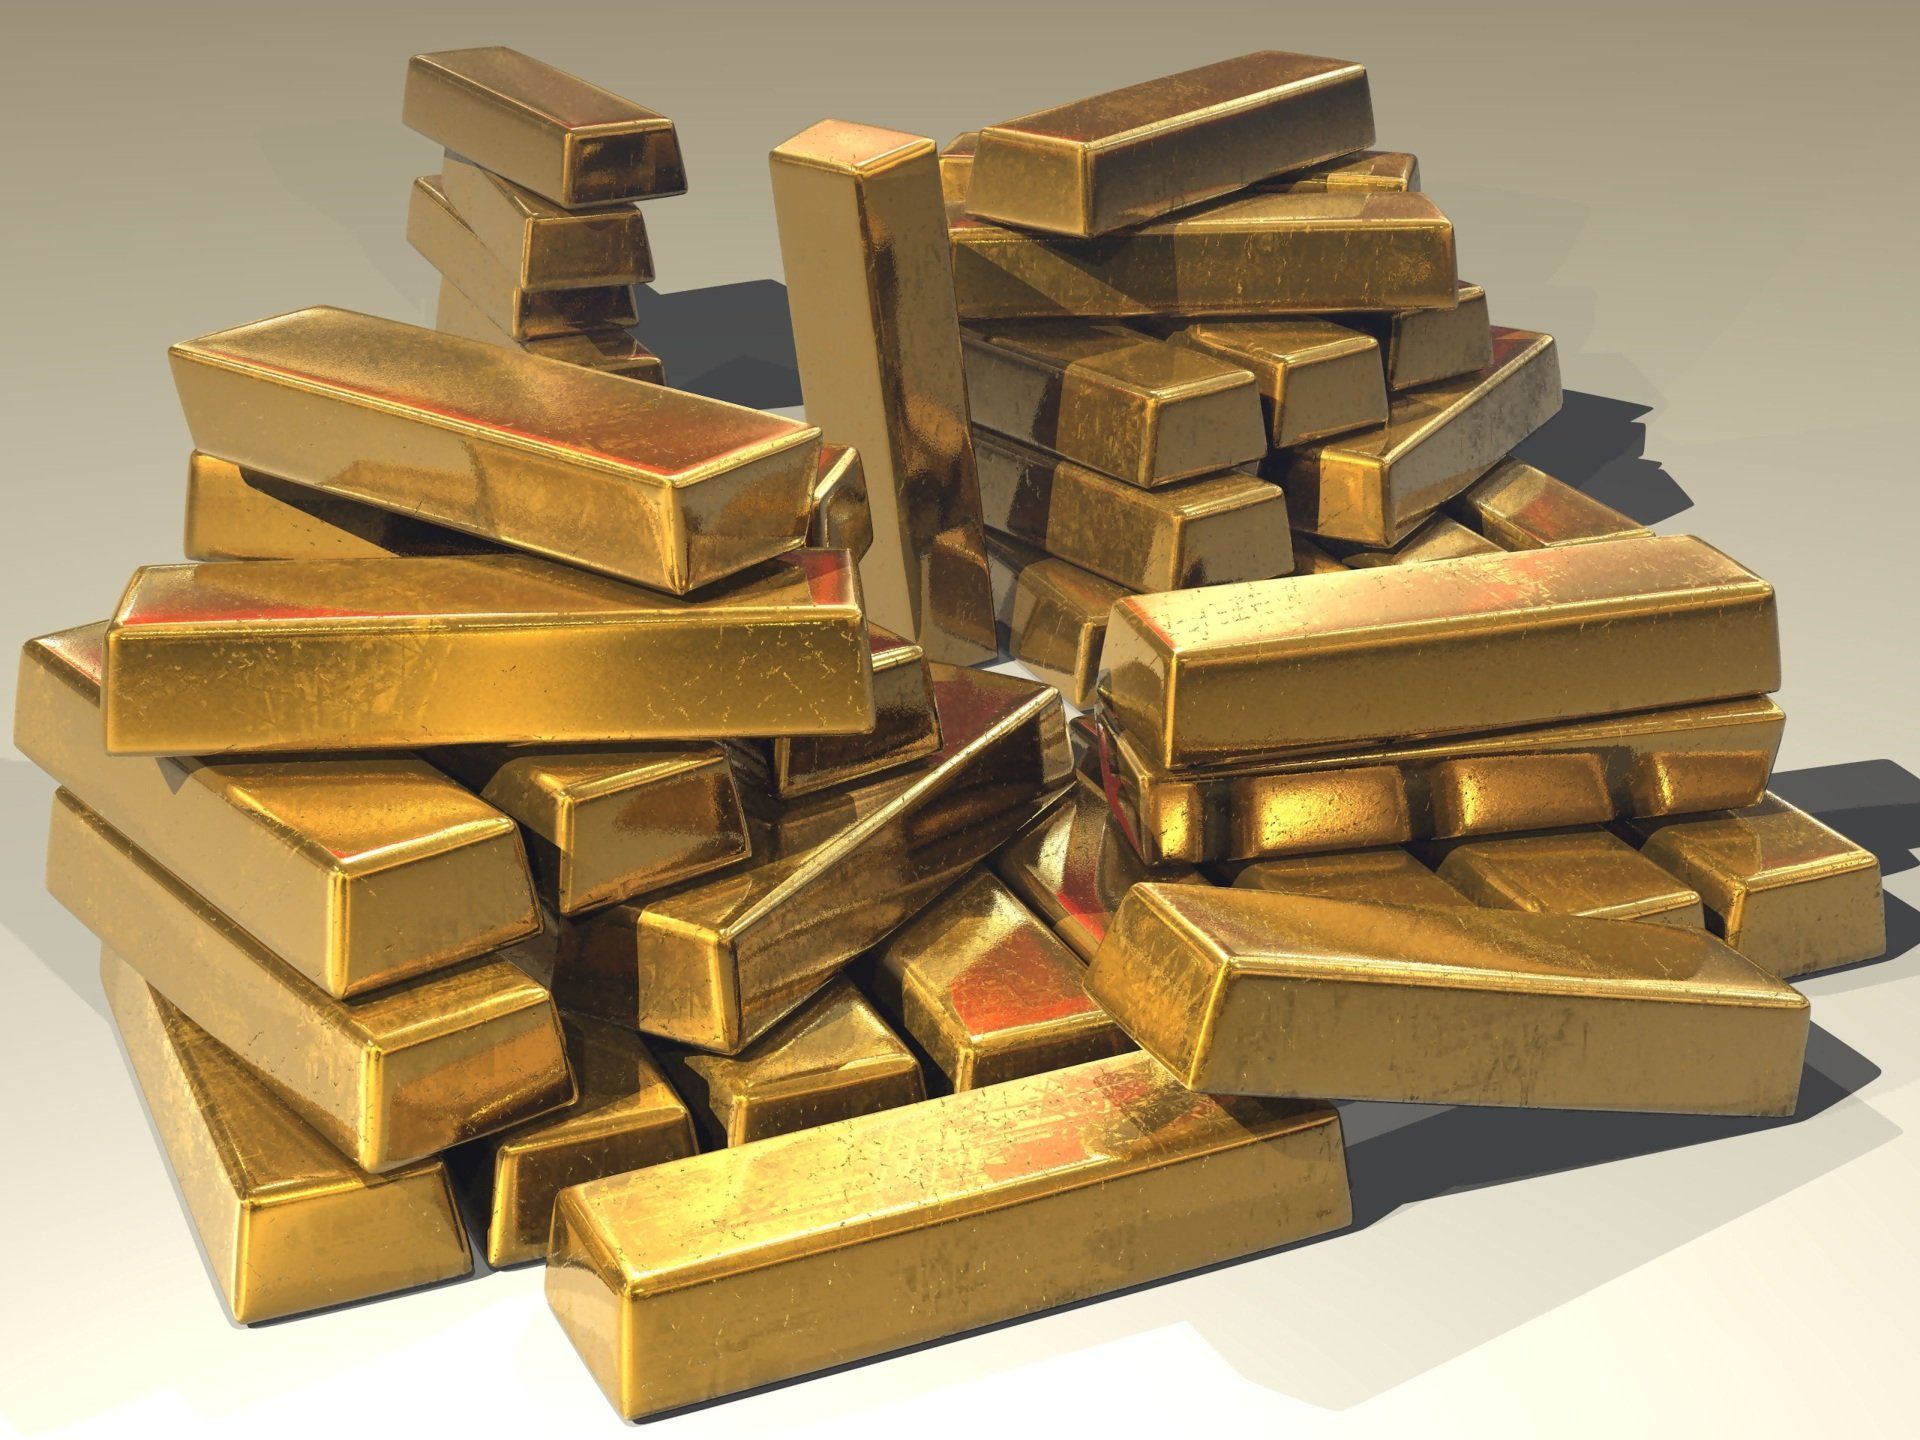 A large pile of gold bars